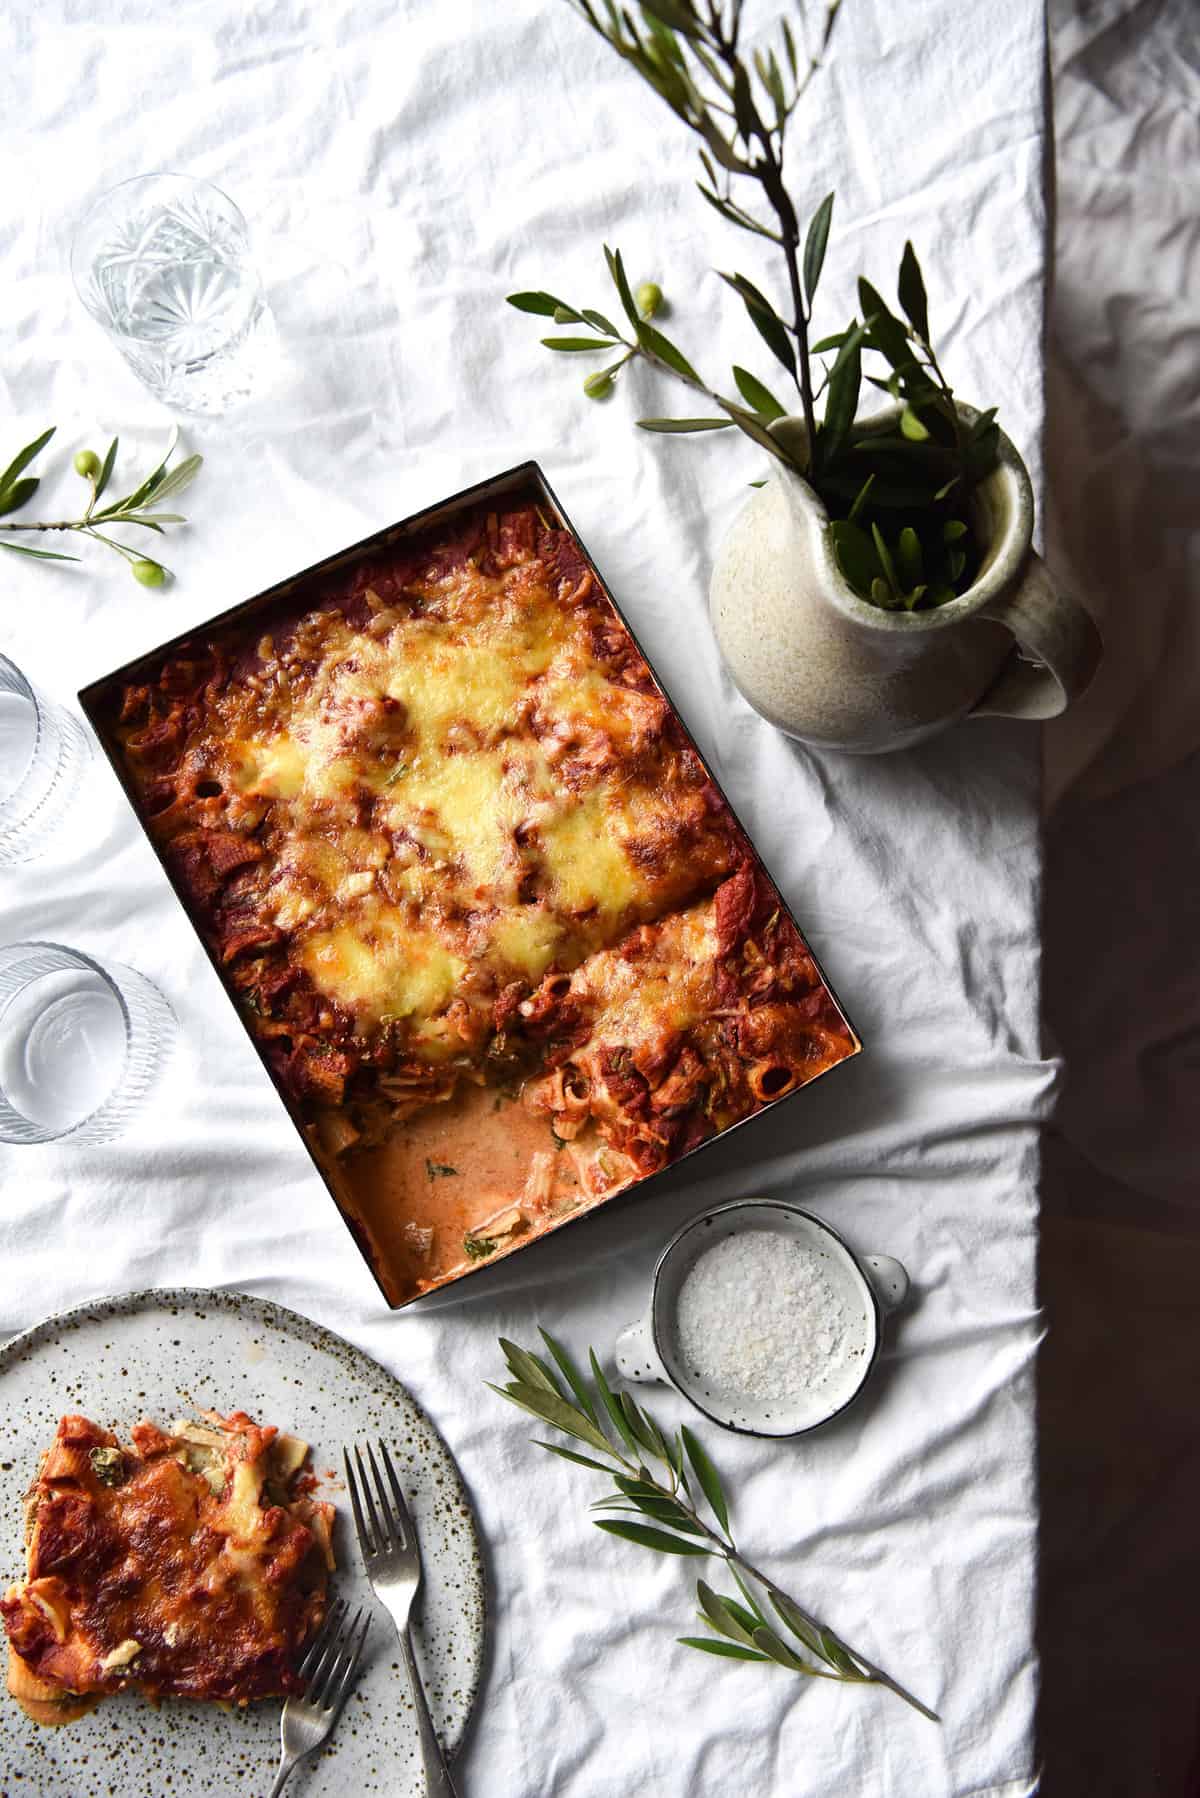 An aerial image of a gluten free pasta bake on a white marble table surrounded by olive leaves and an extra plate of pasta bake.